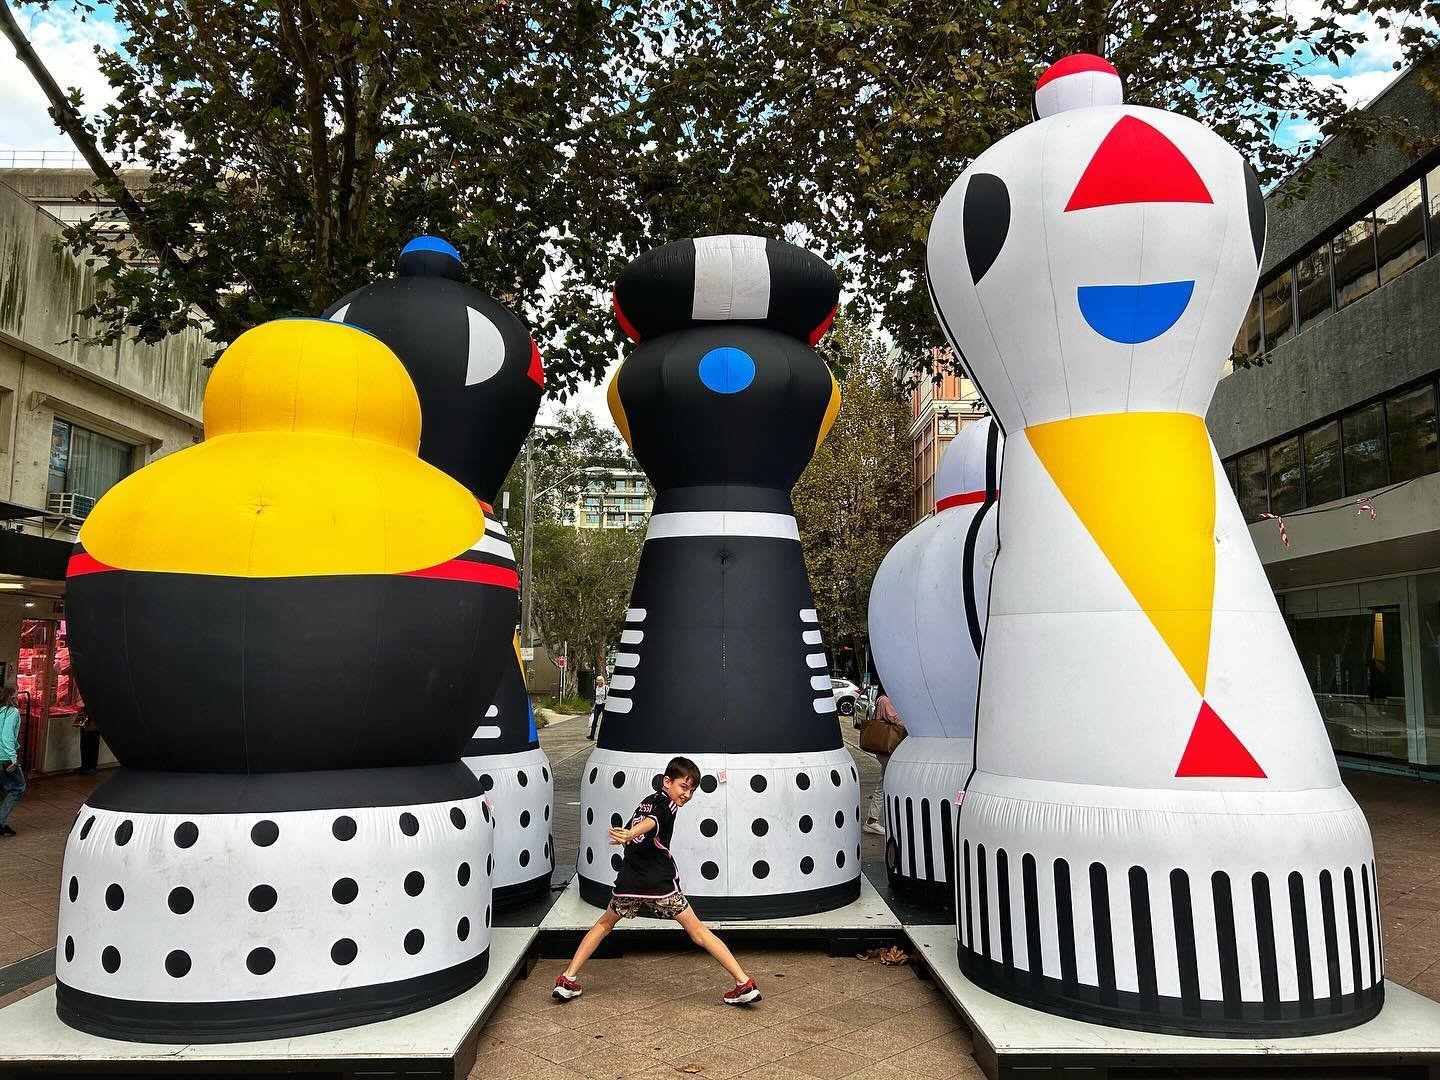 #sydney Checkout Chess &lsquo;checkmates&rsquo; around Chatswood CBD until 19 May. Grab a selfie, learn some moves &amp; strategies, take on challengers and play giant chess on the concourse. @theconcoursechatswood @chatswood_nsw #chatswood #chatswoo